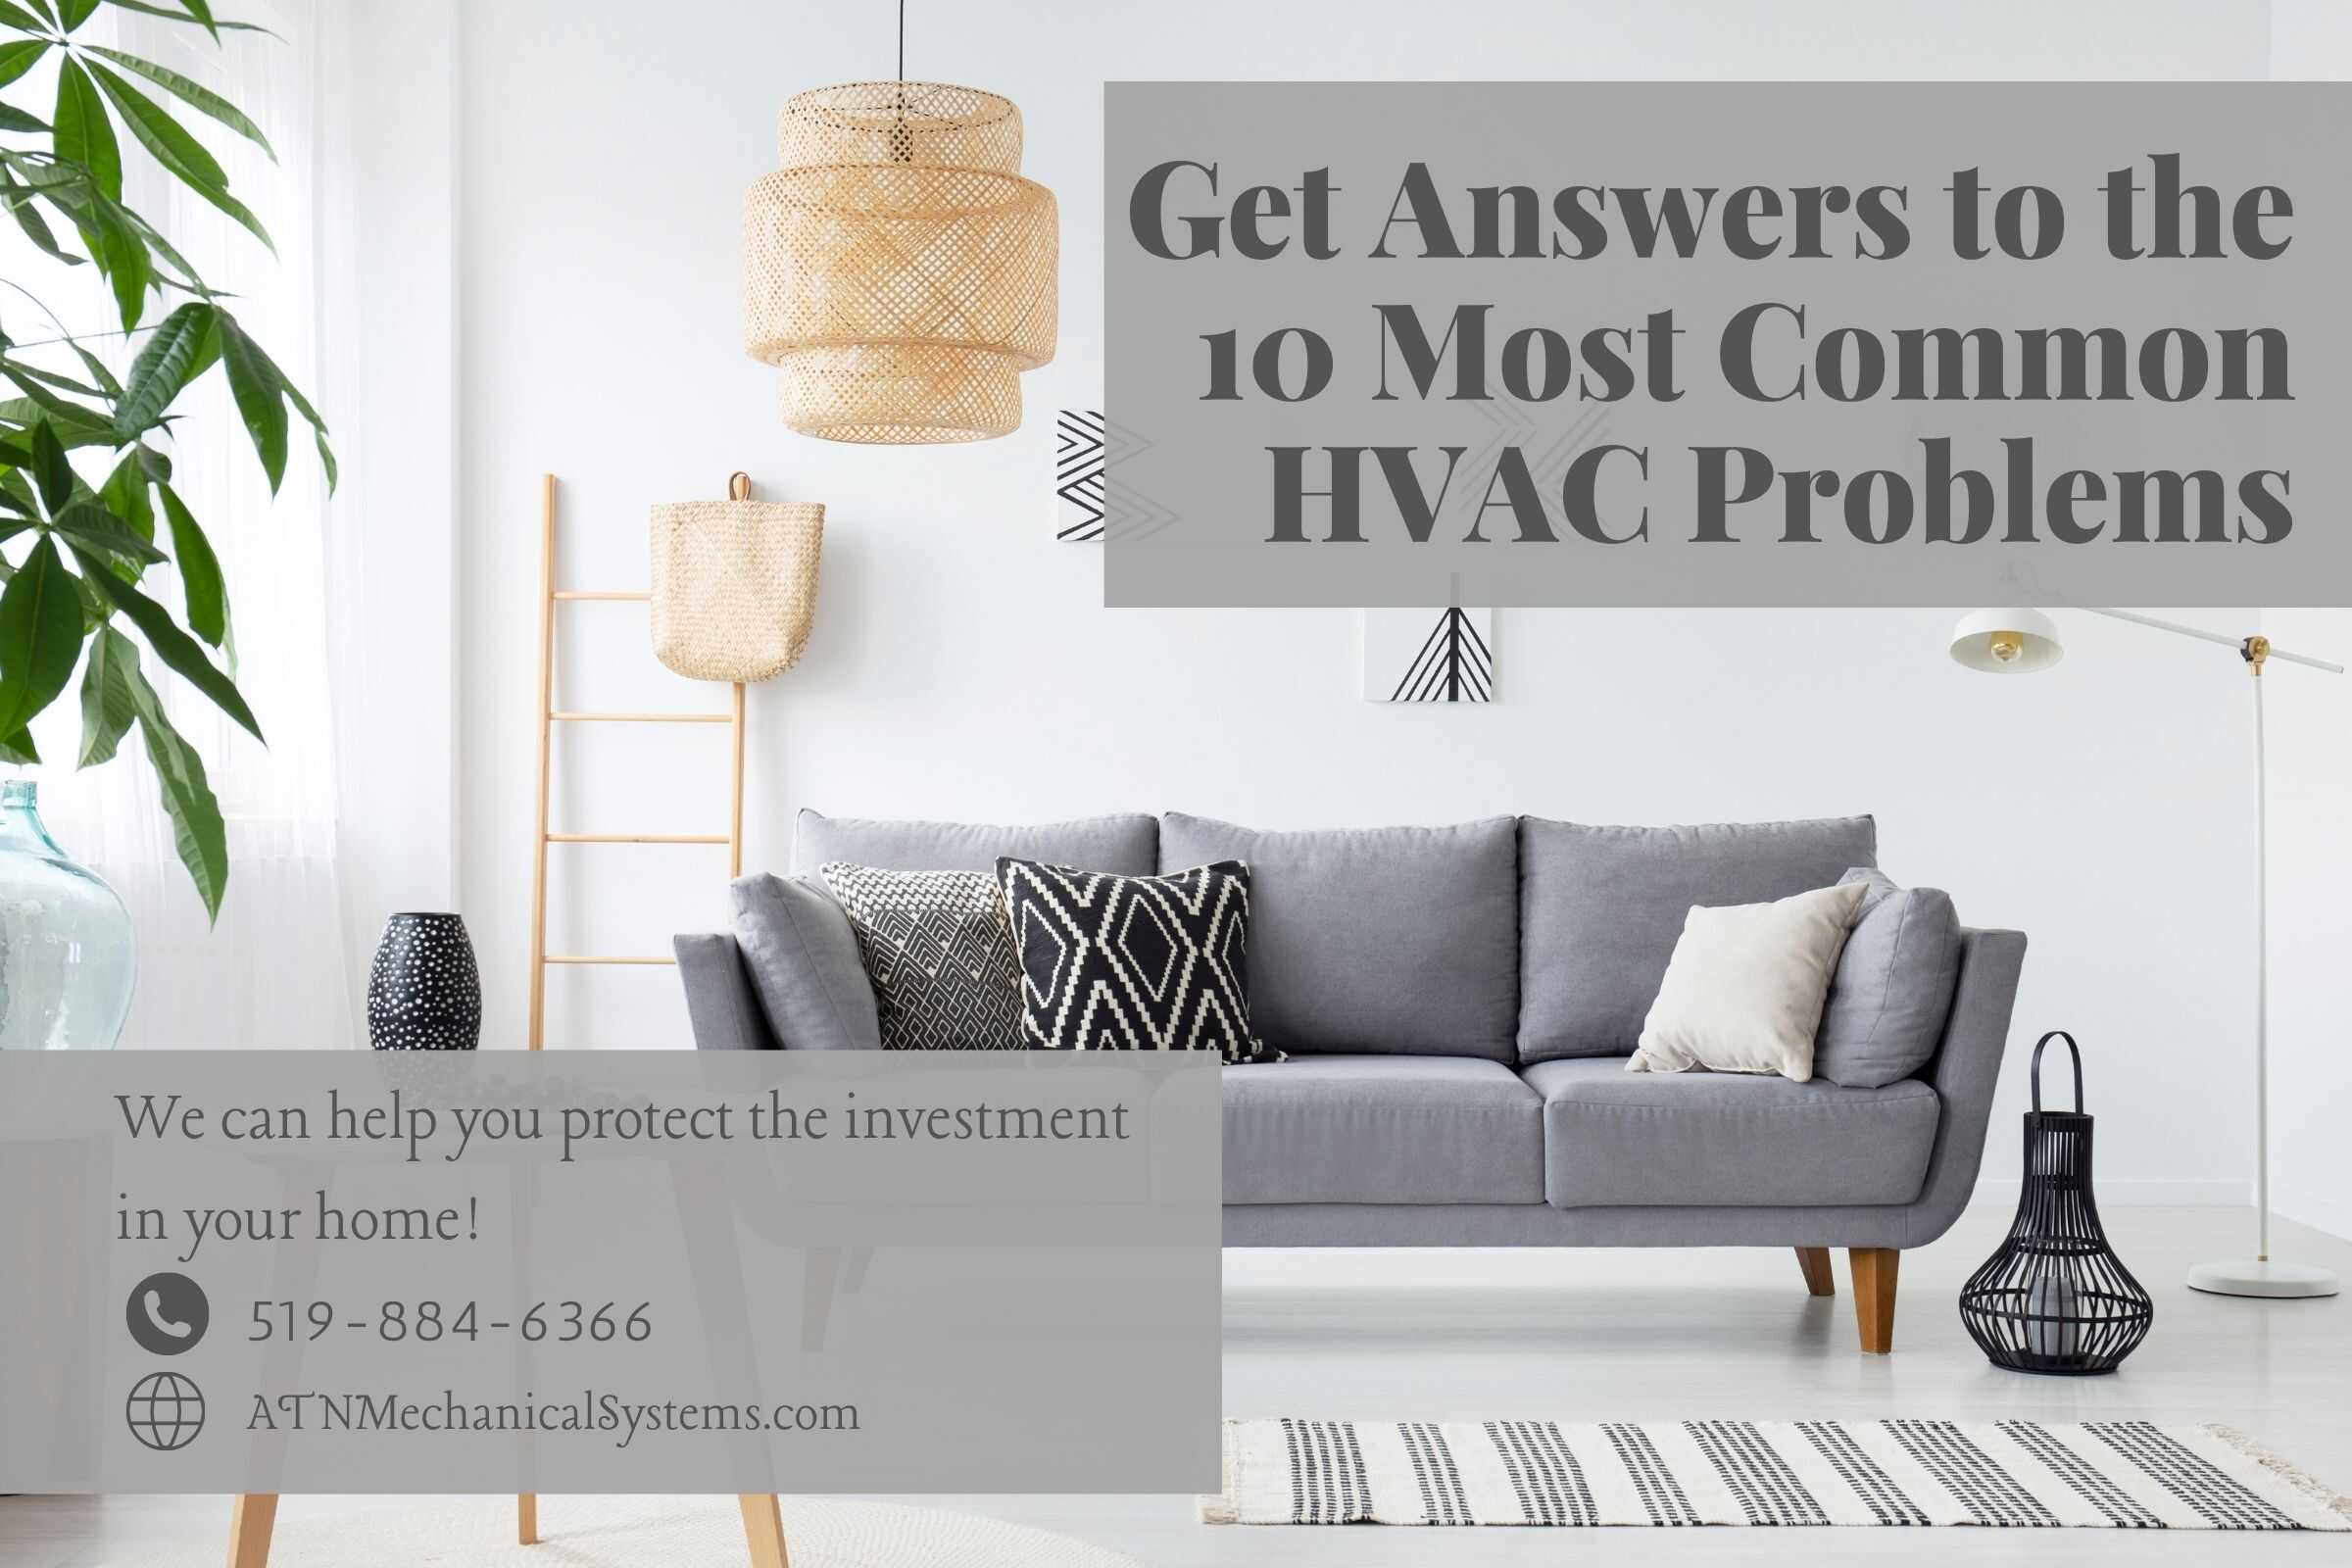 Get Answers to the 10 Most Common HVAC Problems - Blog Image - ATN Mechanical SYstems